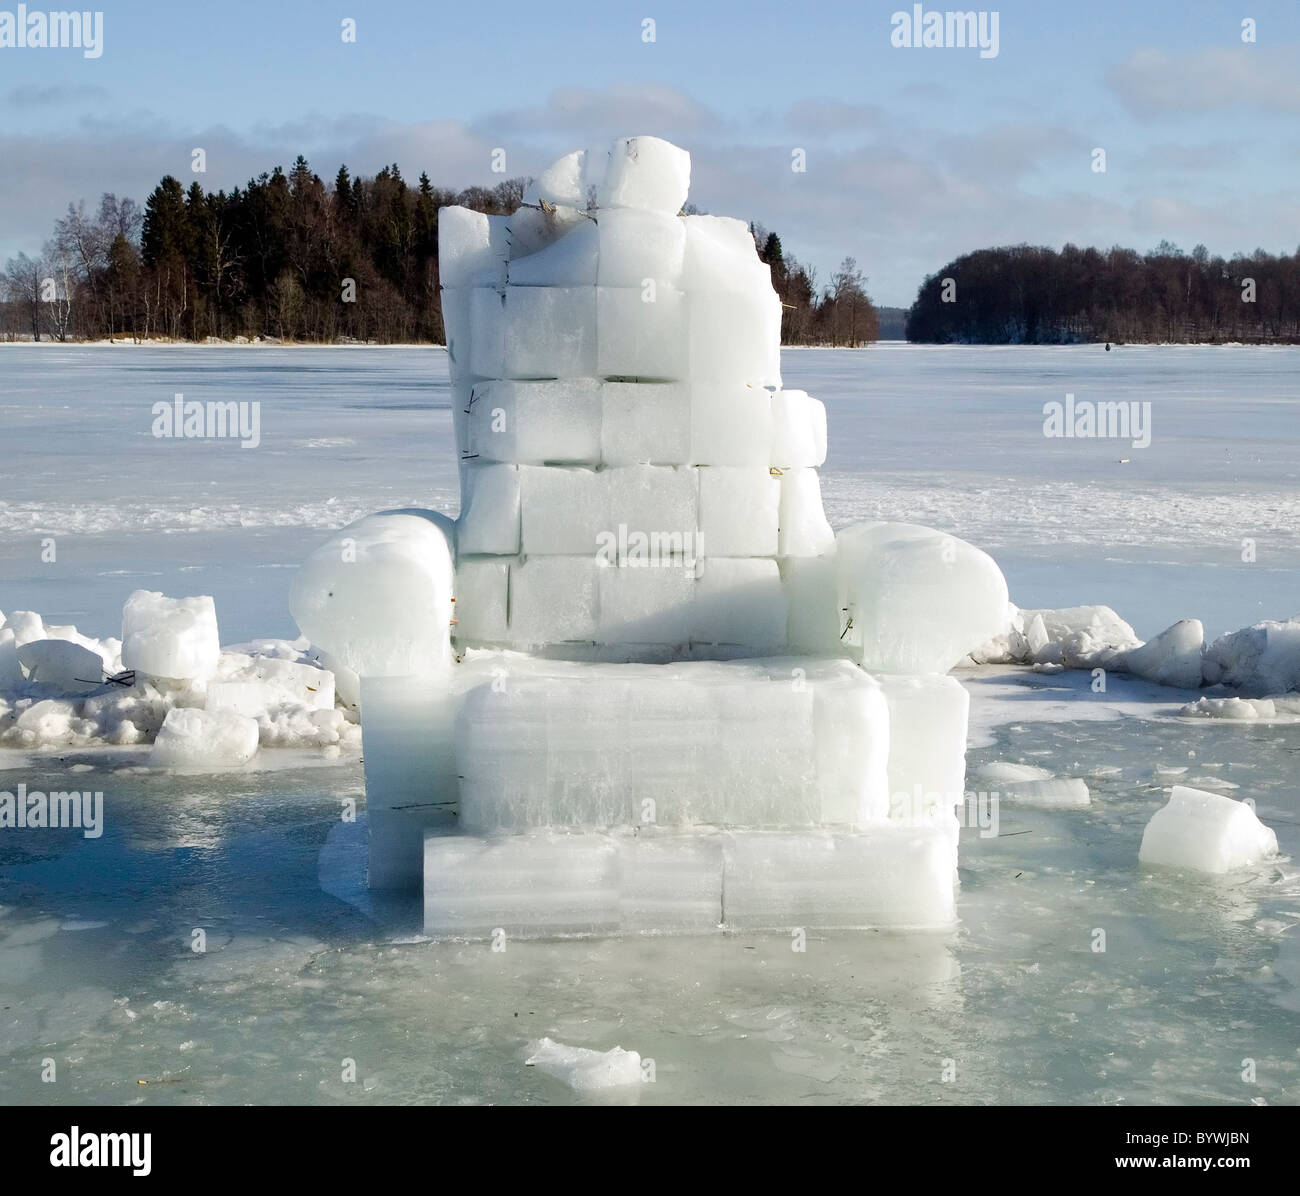 Sculpture made from snow and ice is standing on lake Stock Photo